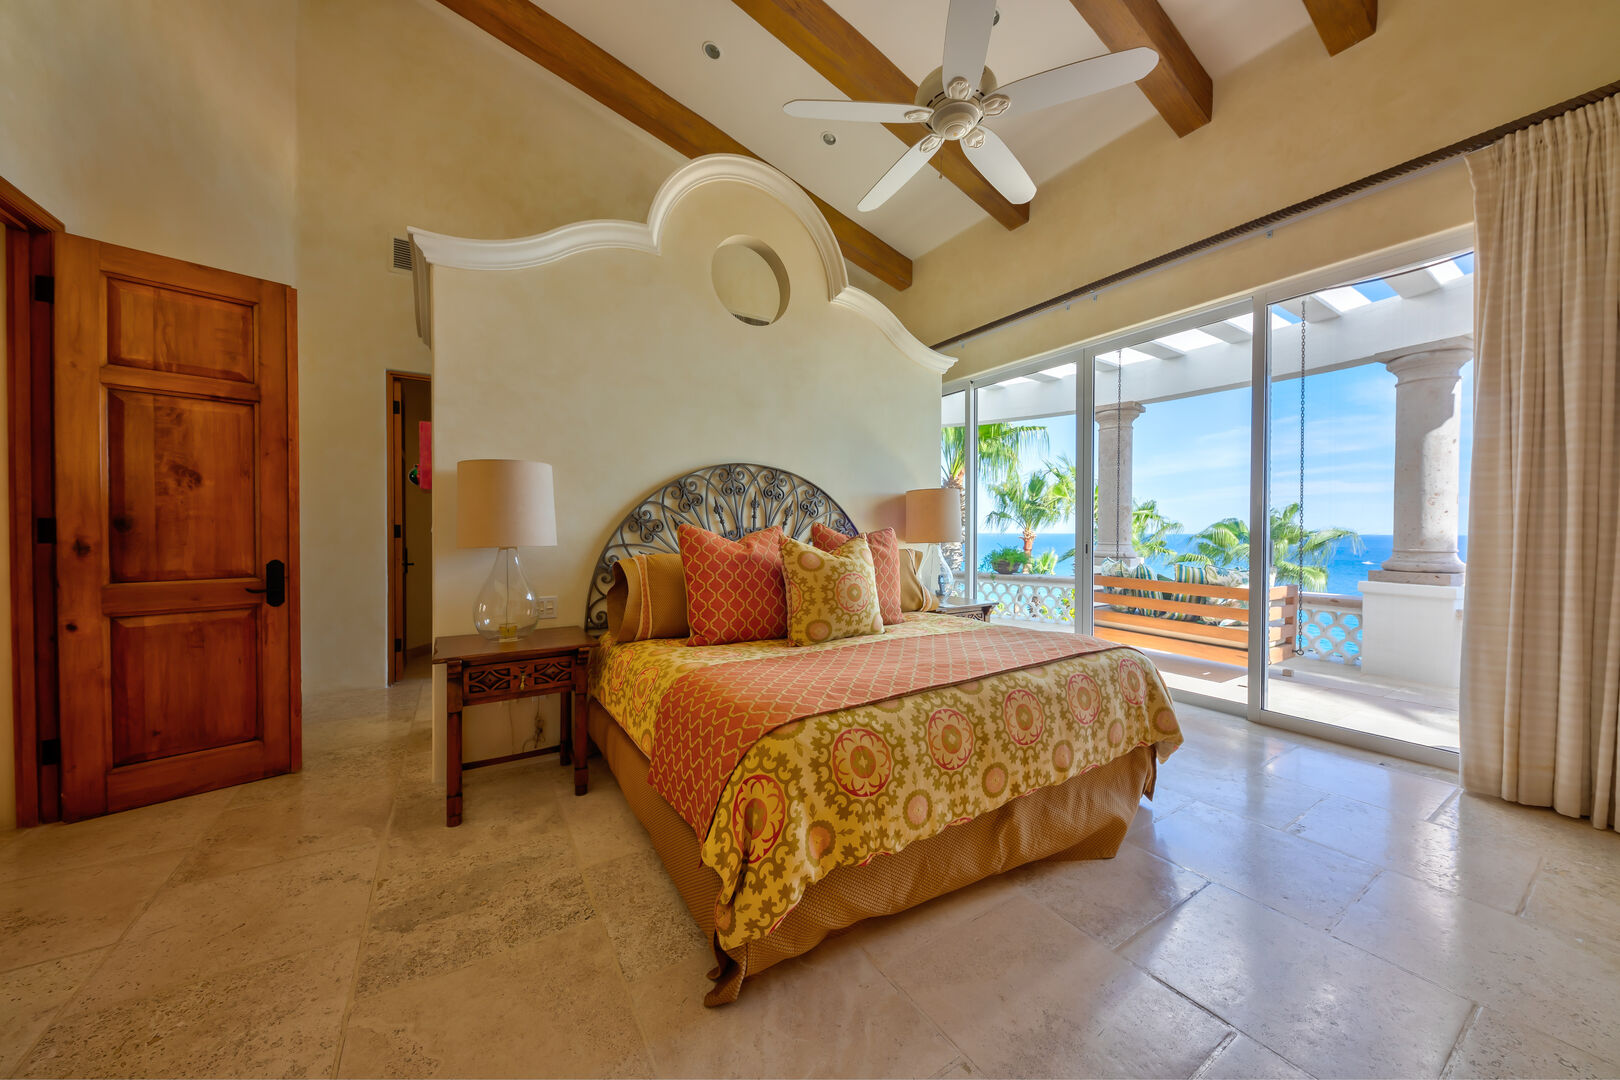 Bedroom with a Bed at Villa 498.